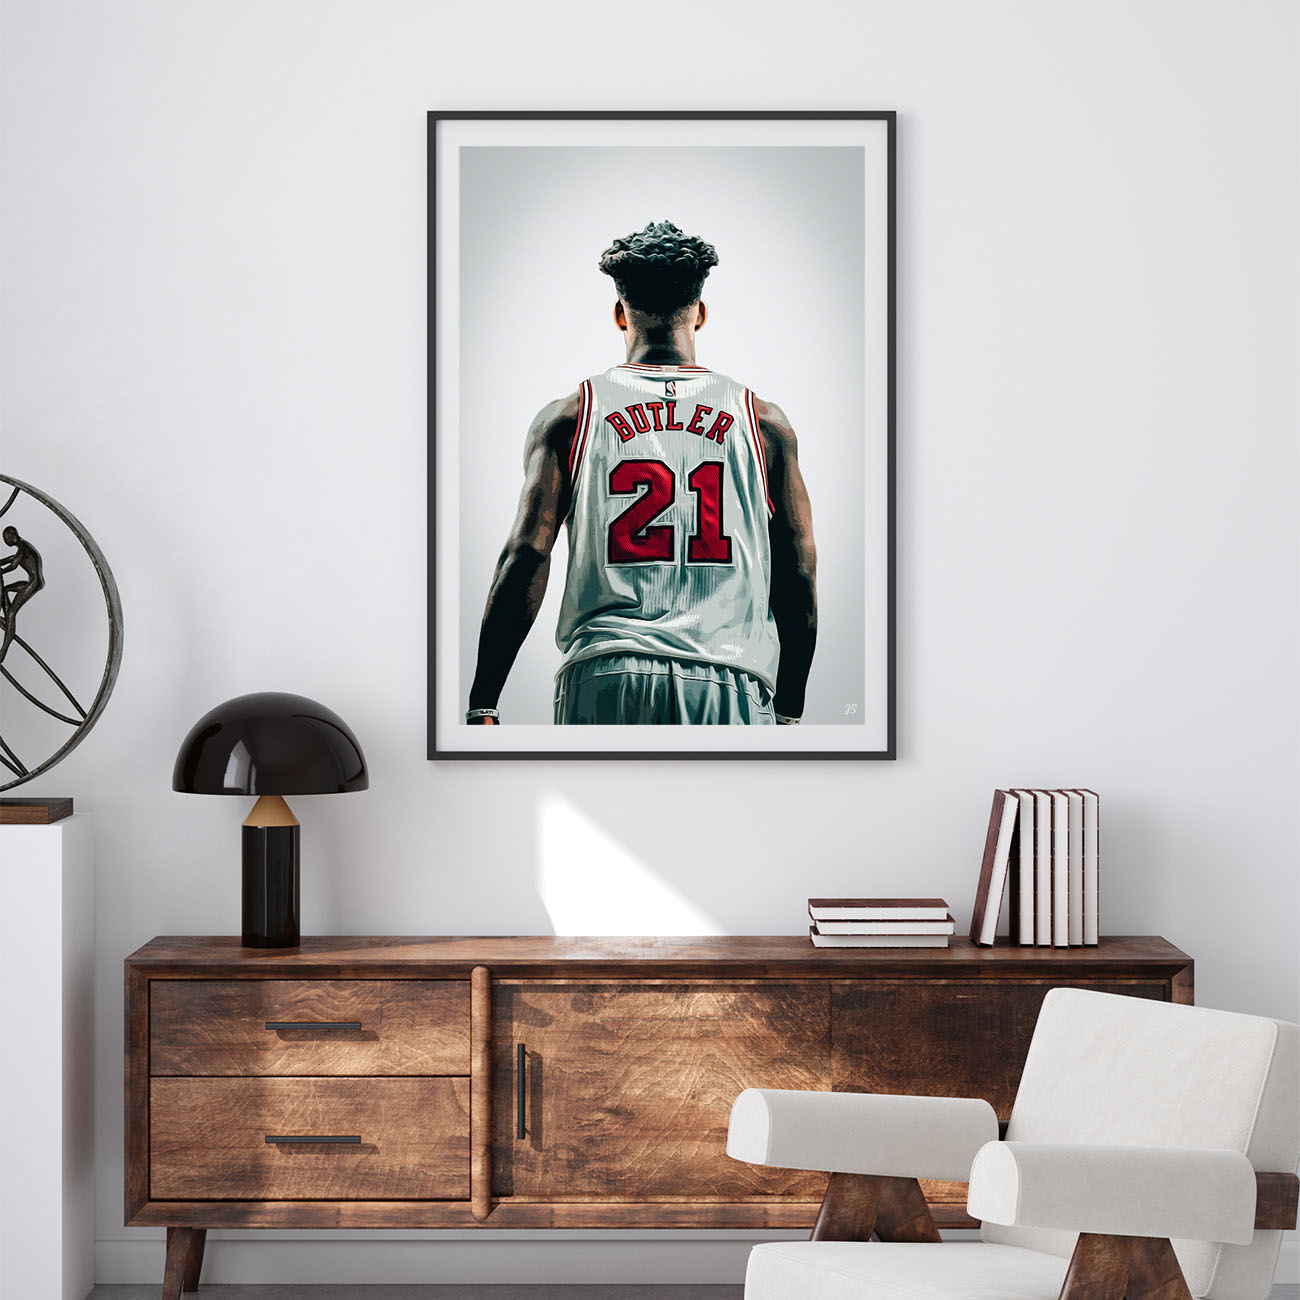 Trends International NBA Miami Heat - Jimmy Butler Feature Series 23 Framed  Wall Poster Prints White Framed Version 14.725 x 22.375